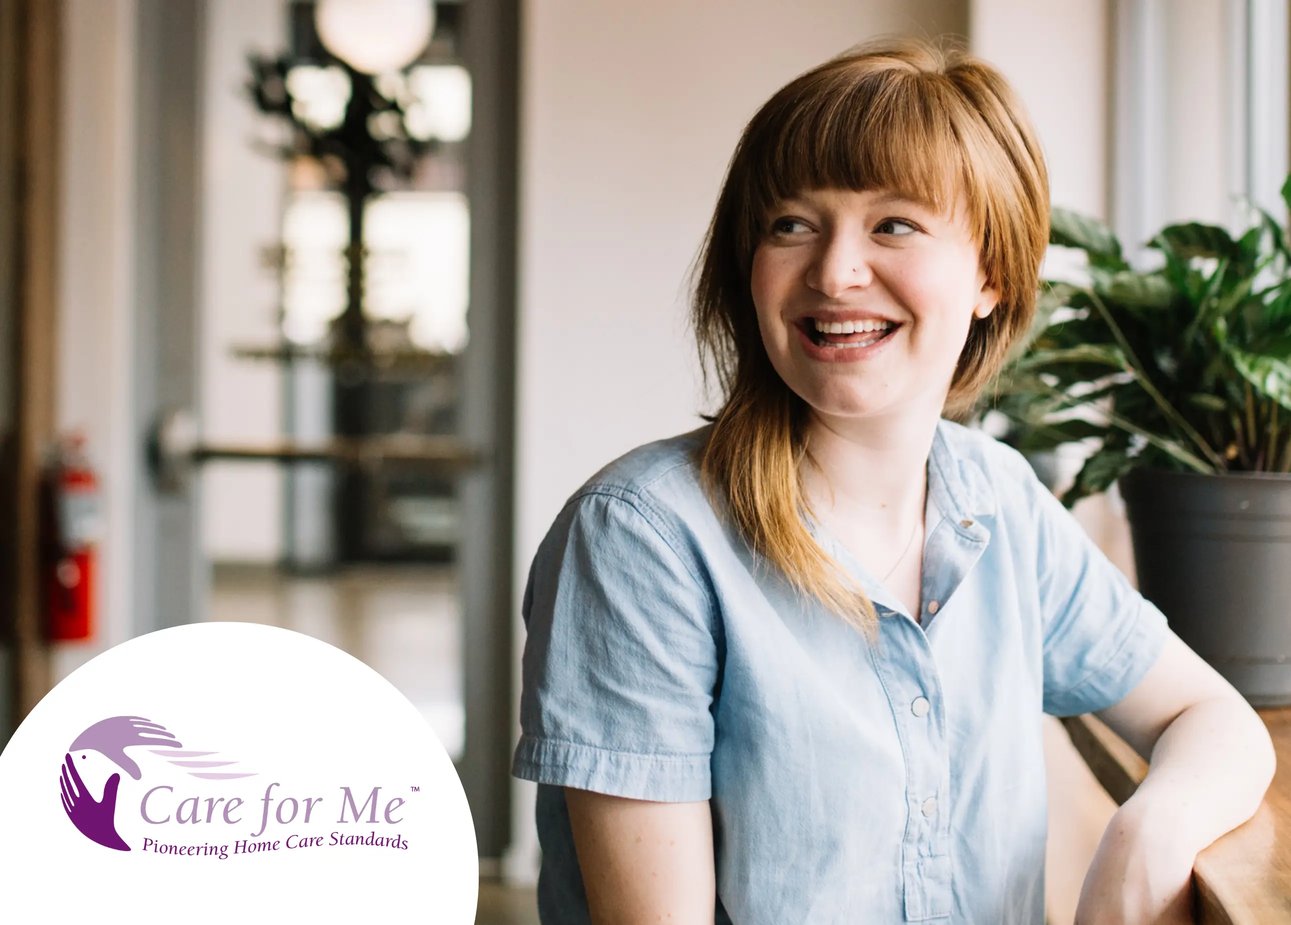 Care for Me - pioneering home care standards